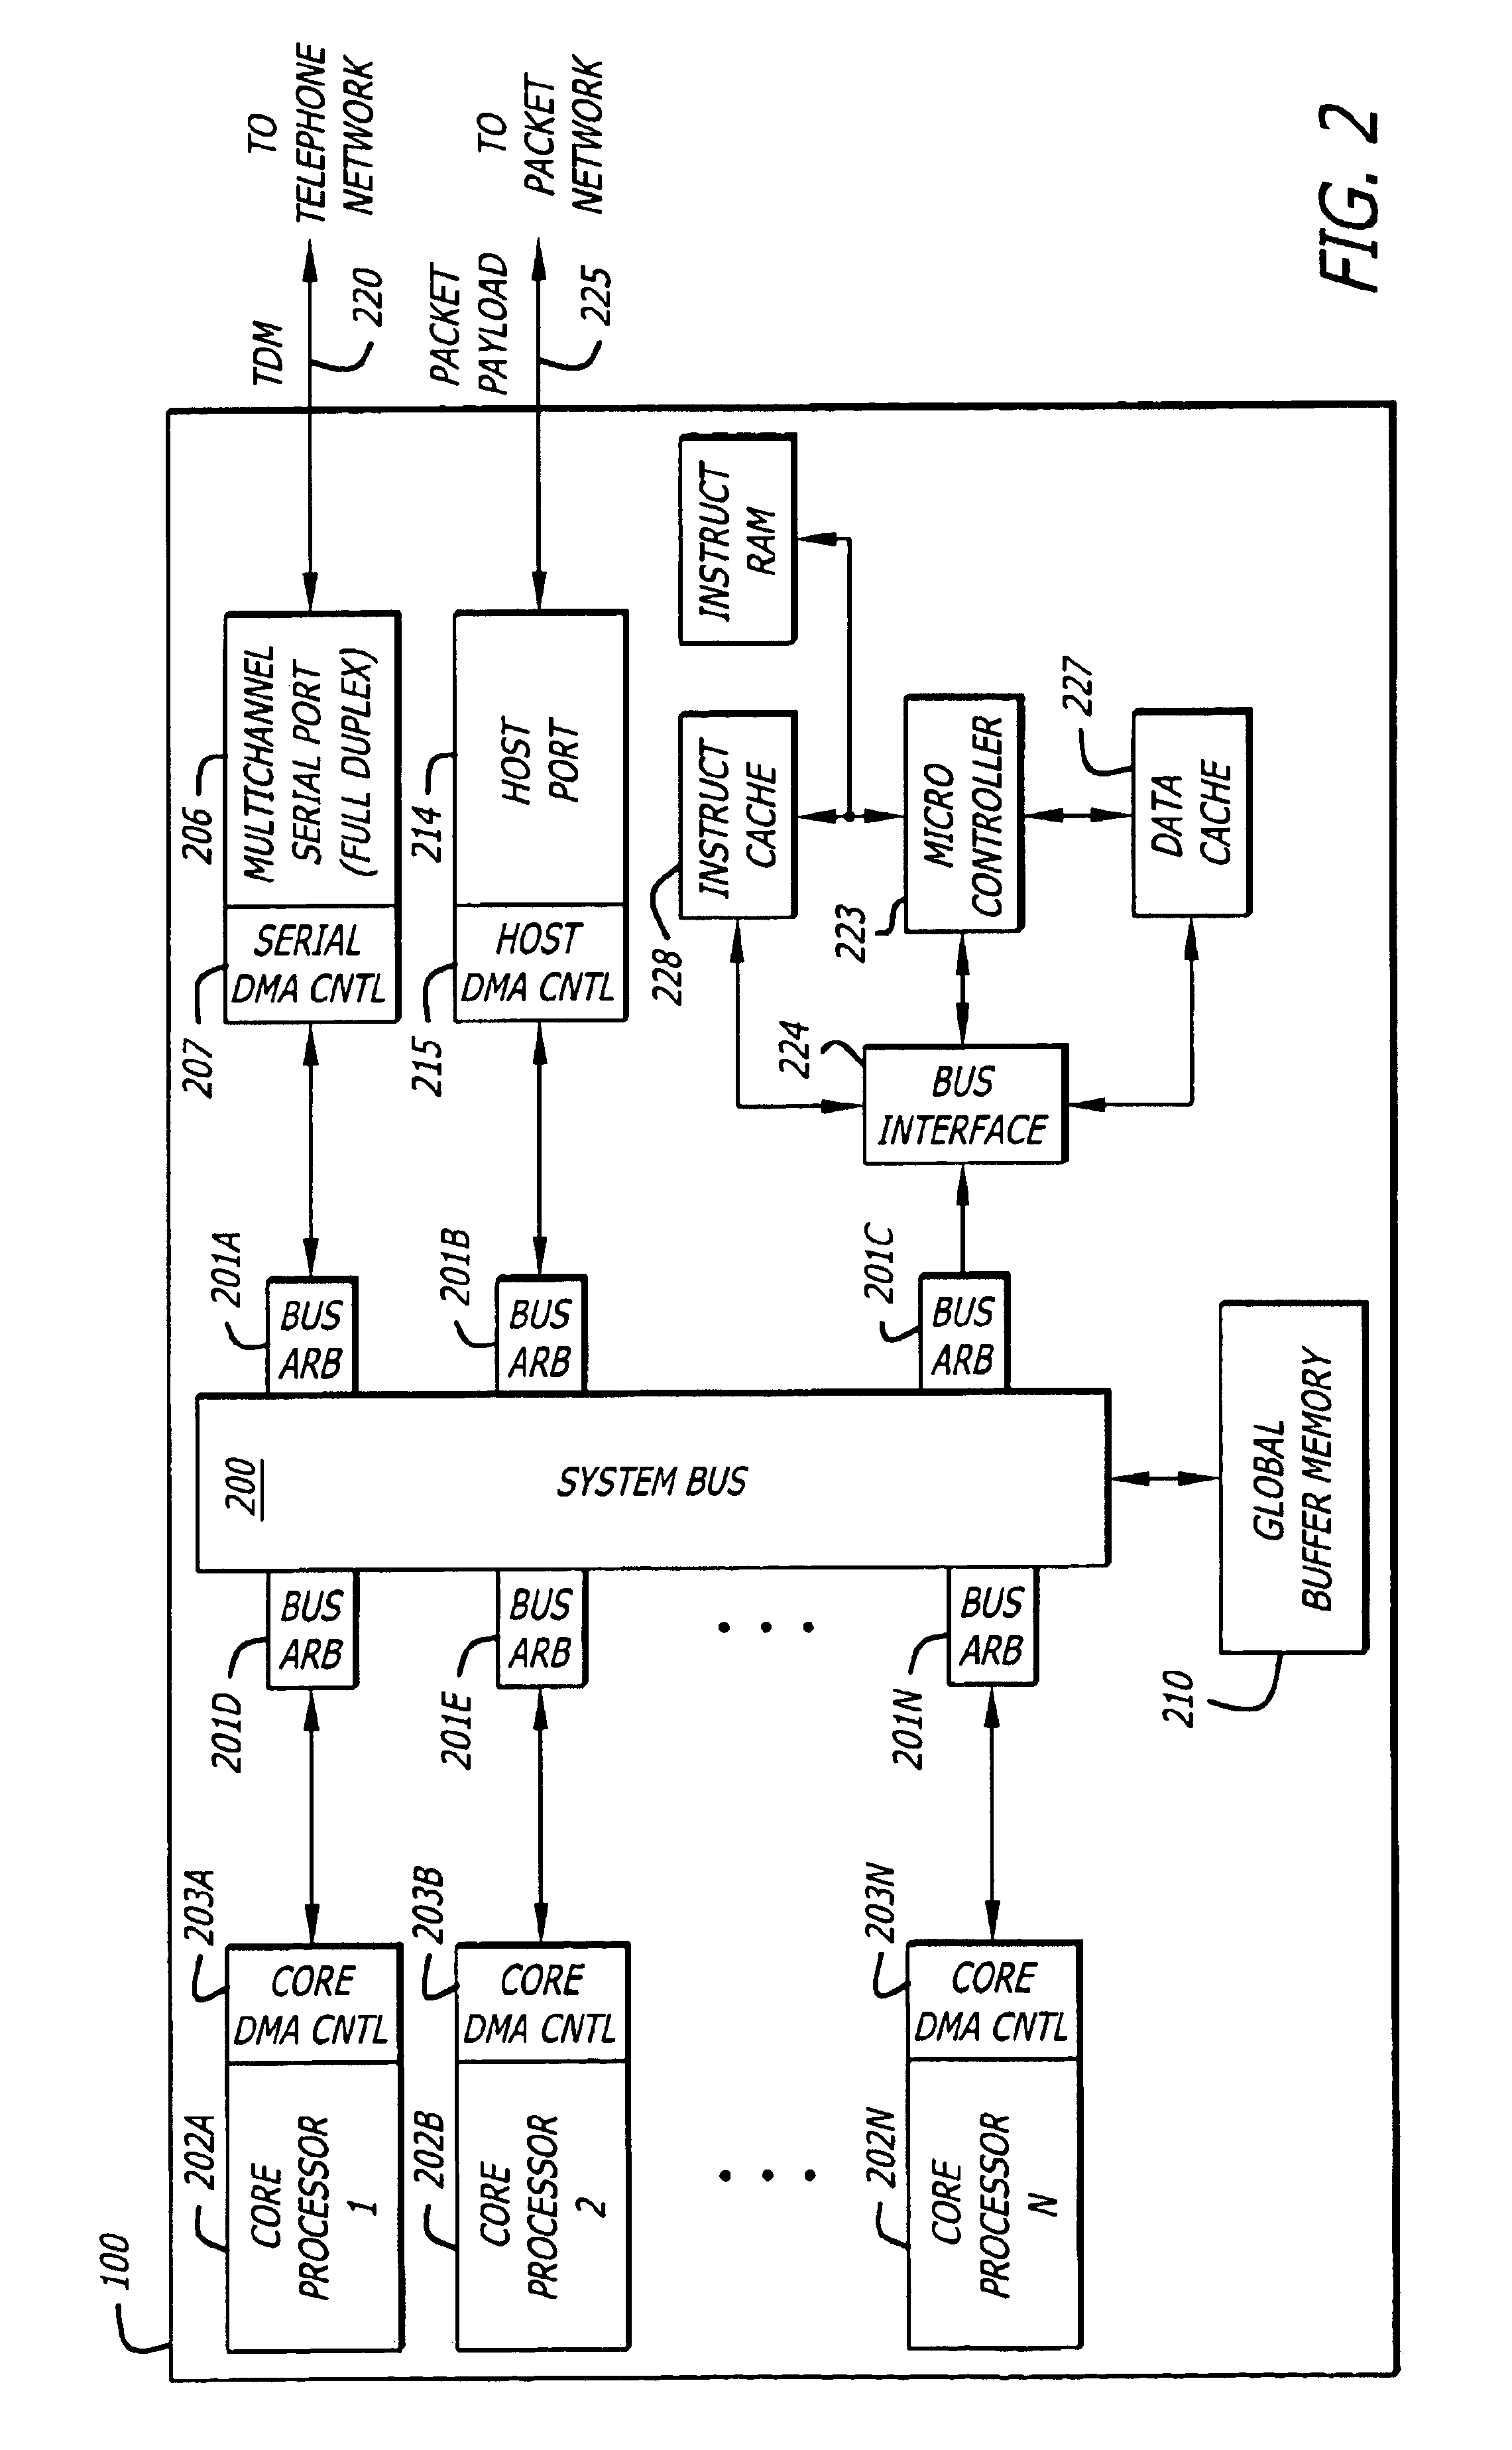 Method and apparatus for distributed direct memory access for systems on chip